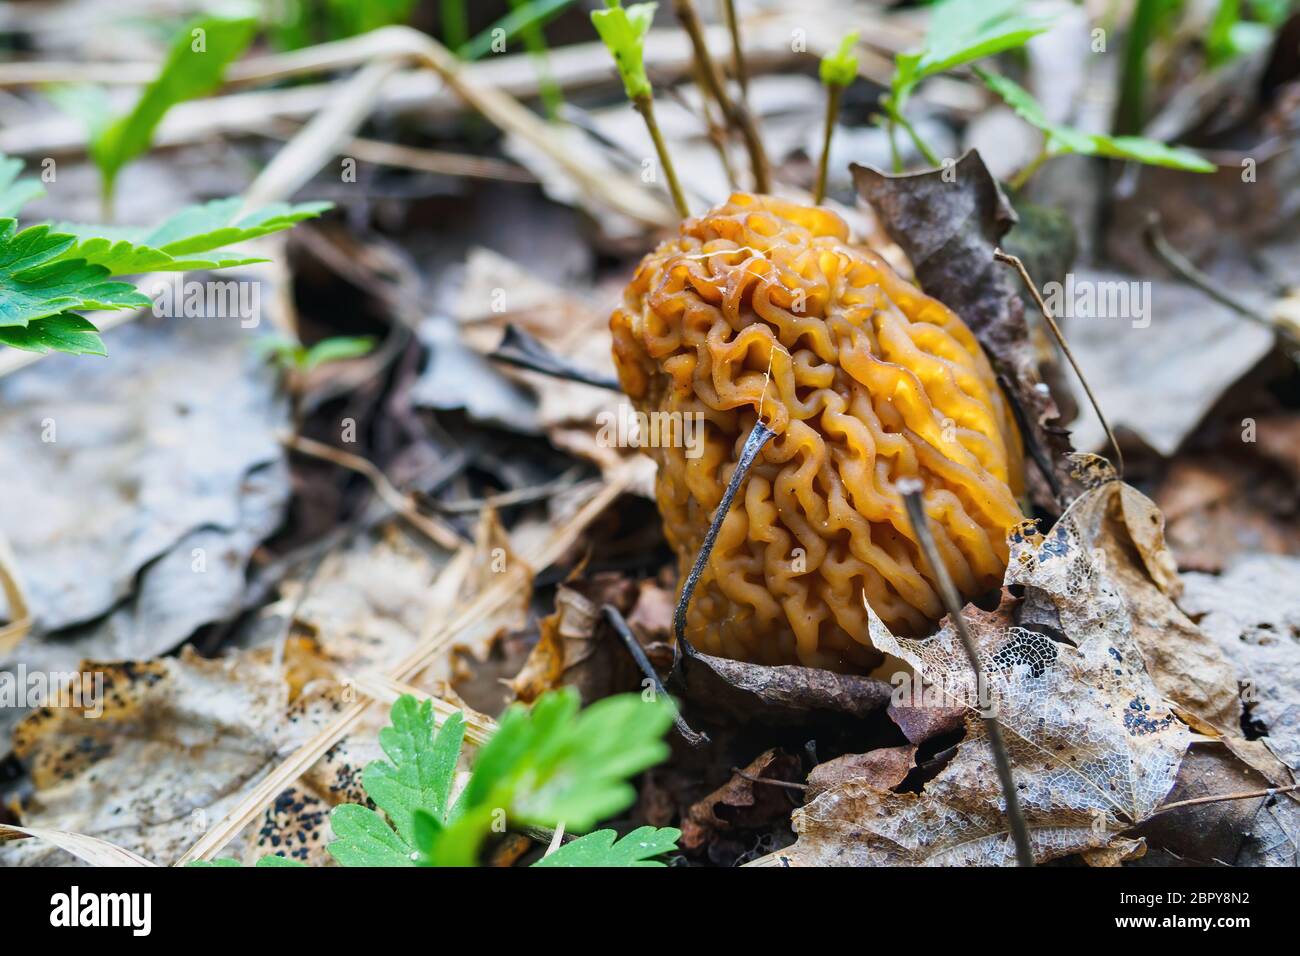 Morchella mushroom, true morels growing in forest in spring day Stock Photo